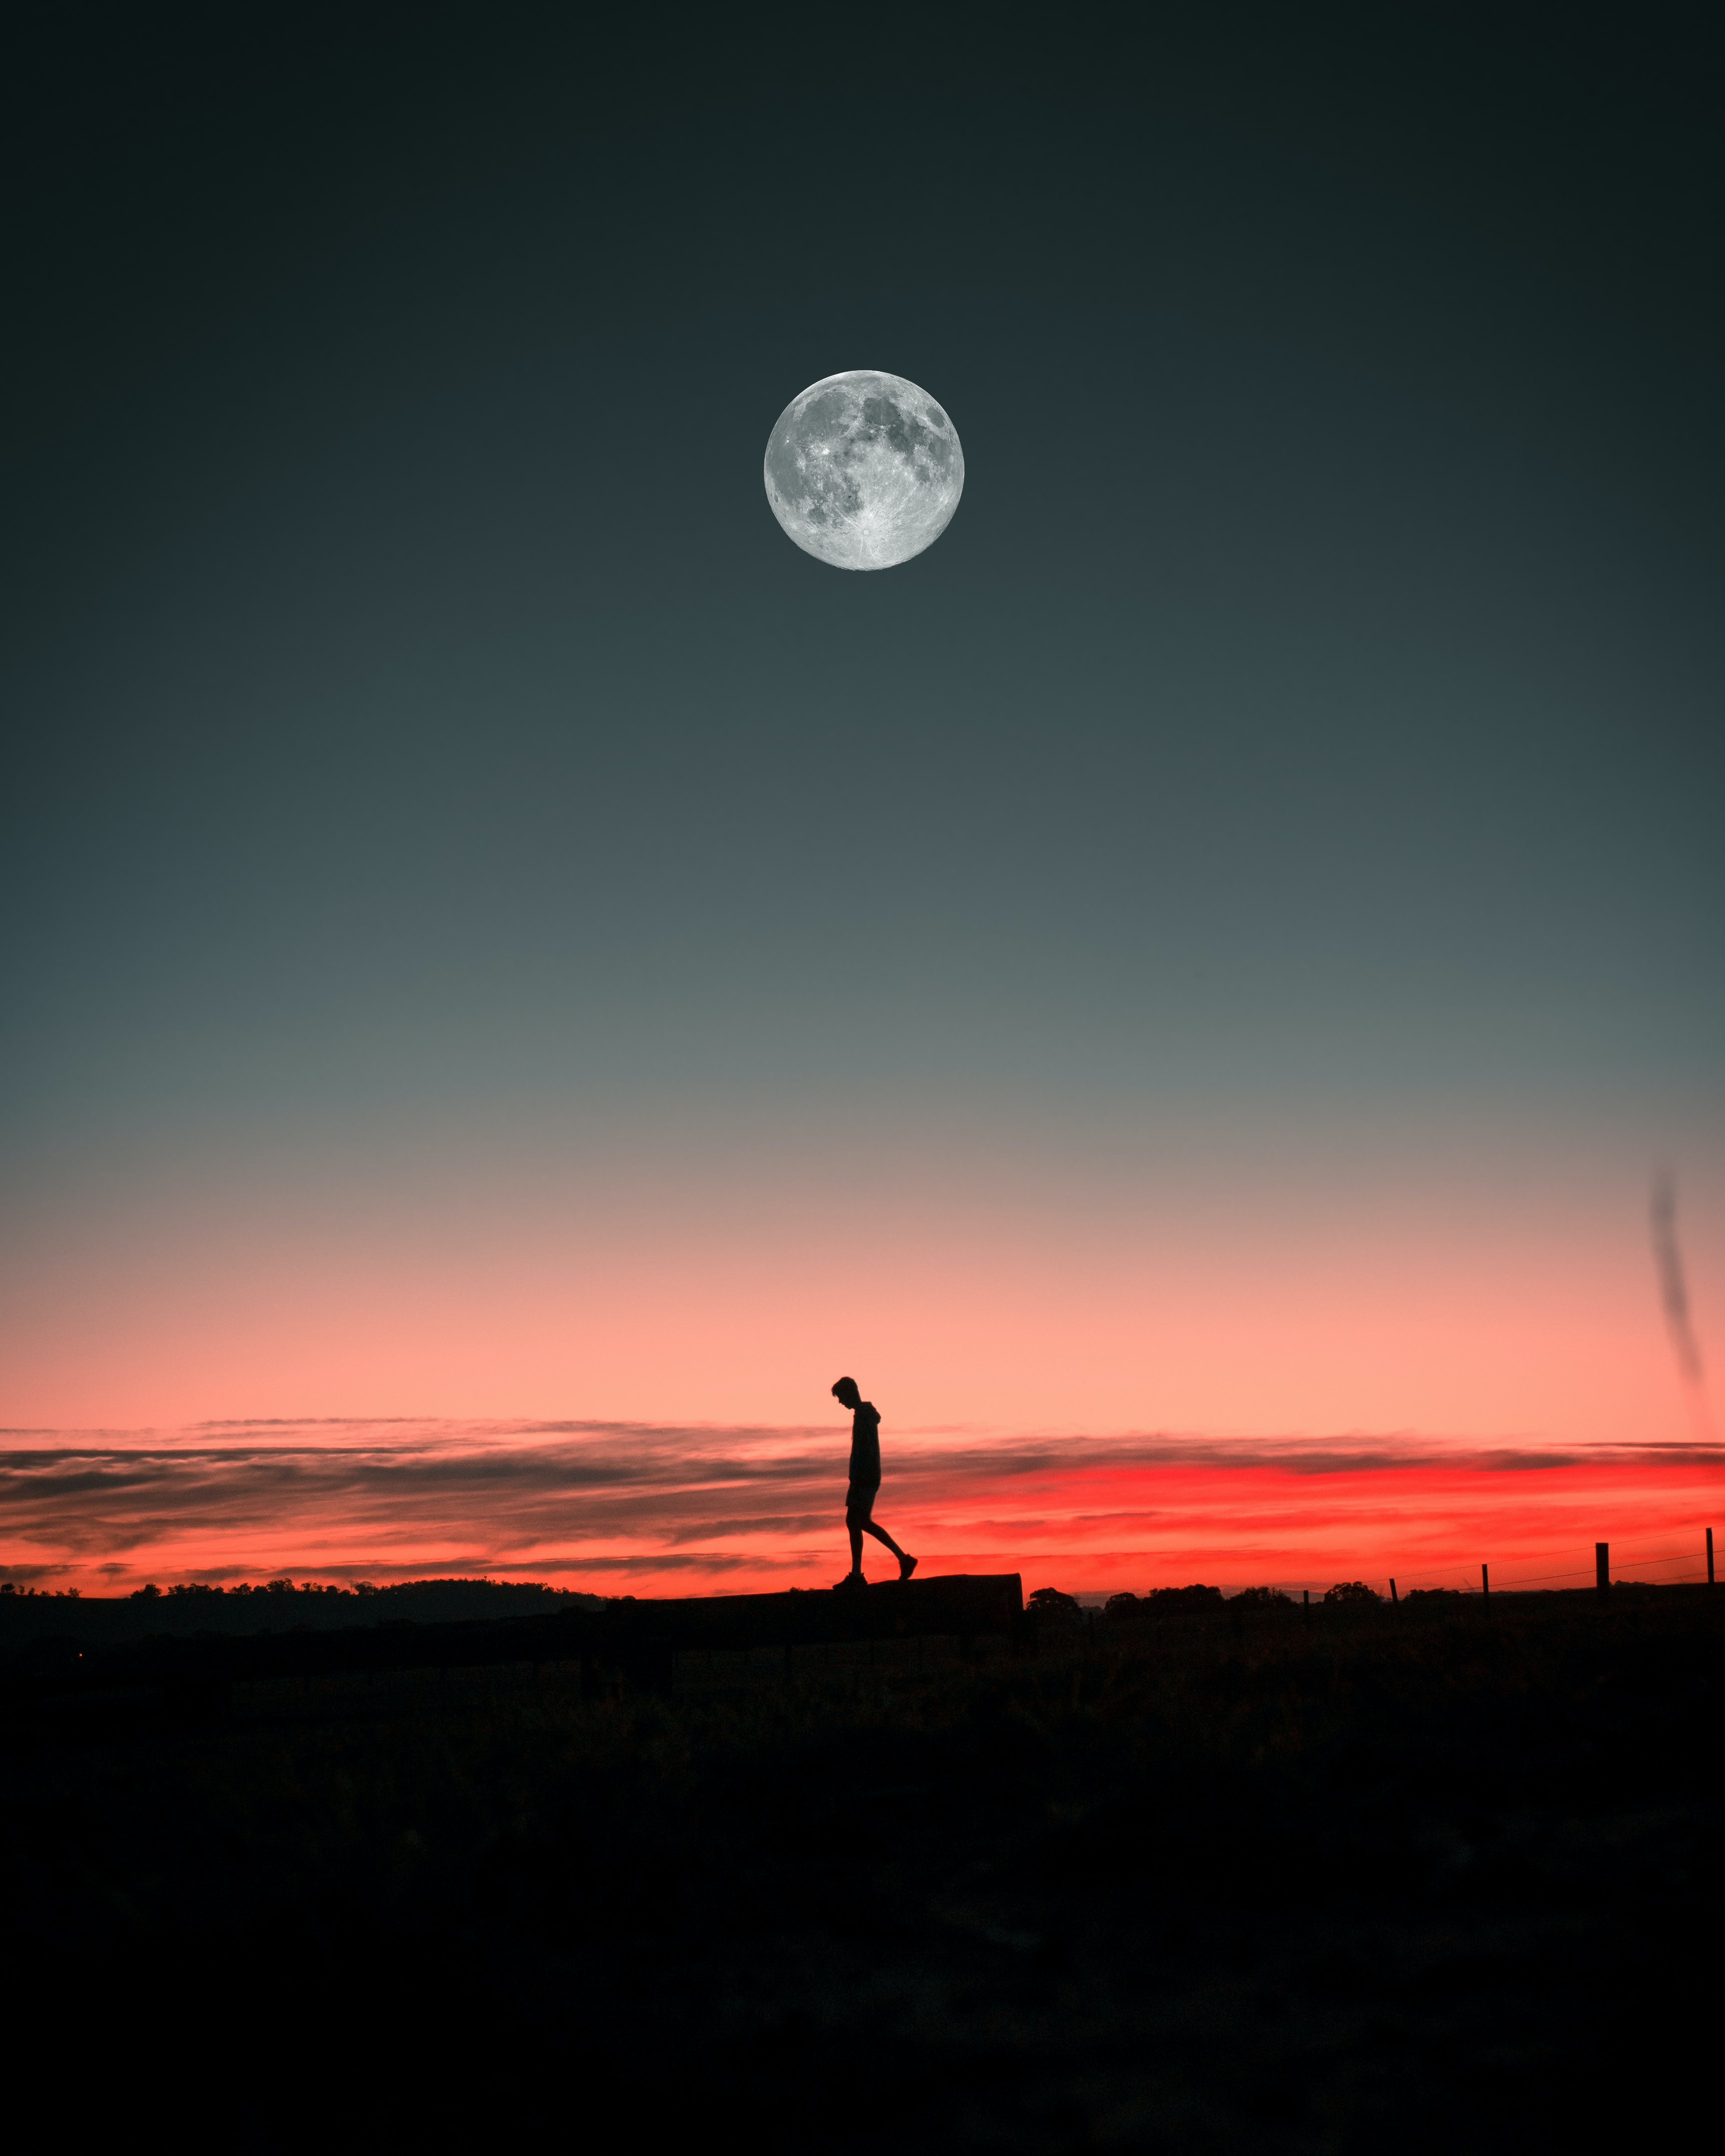 moon, alone, lonely, sunset, loneliness, silhouette, miscellanea, miscellaneous 32K